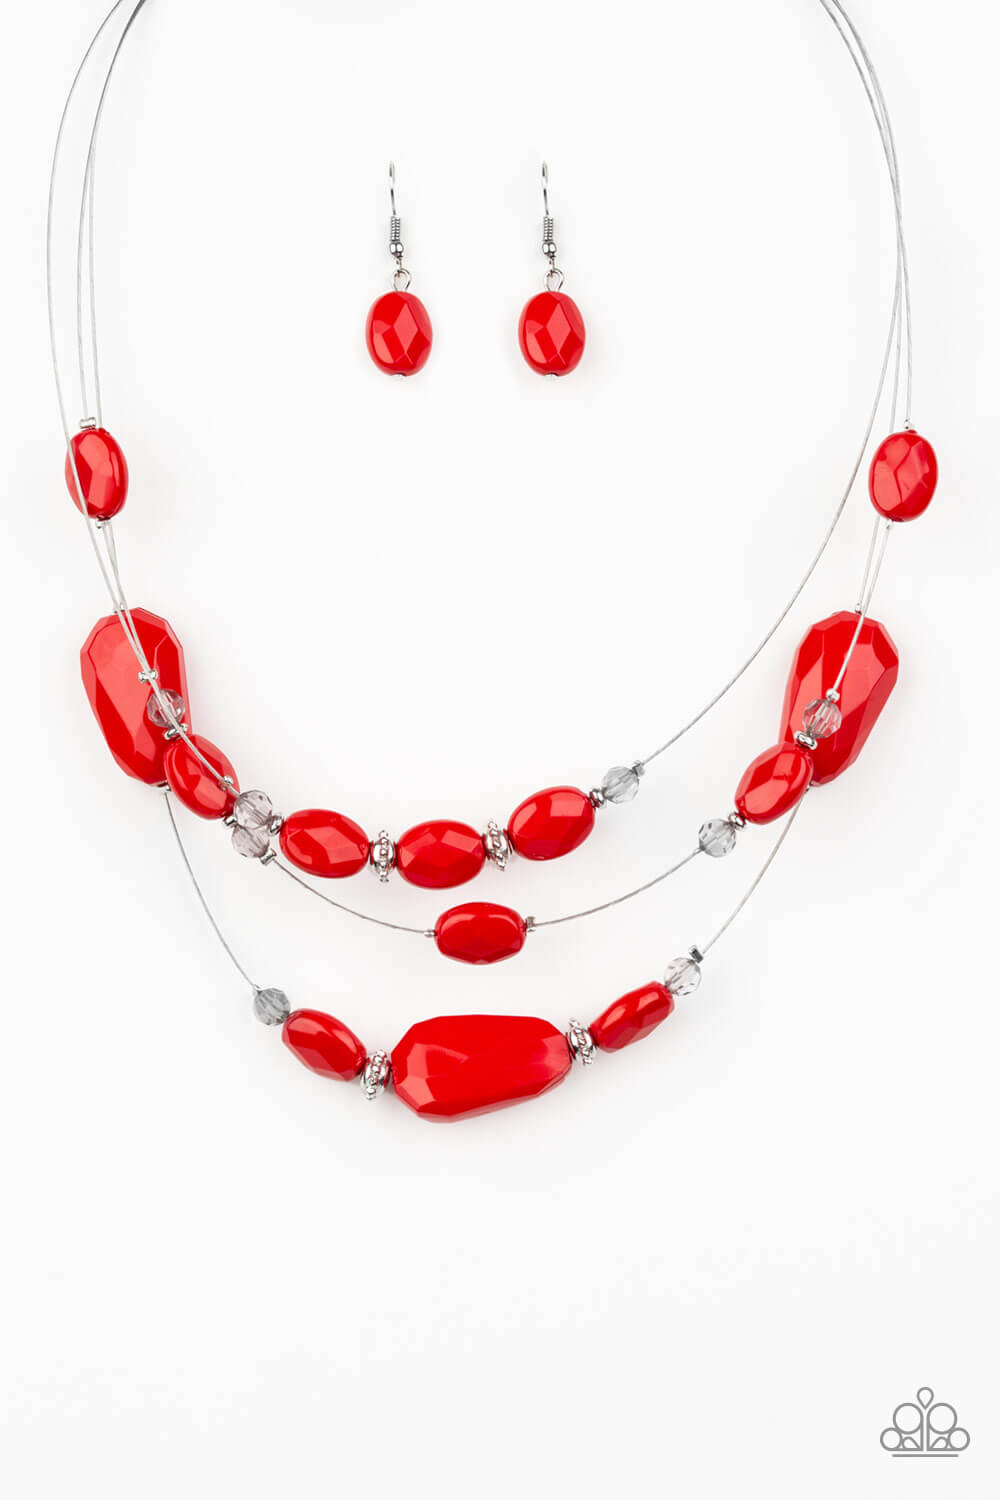 Radiant Reflections- Red Crystal Bead Necklace Set - Princess Glam Shop